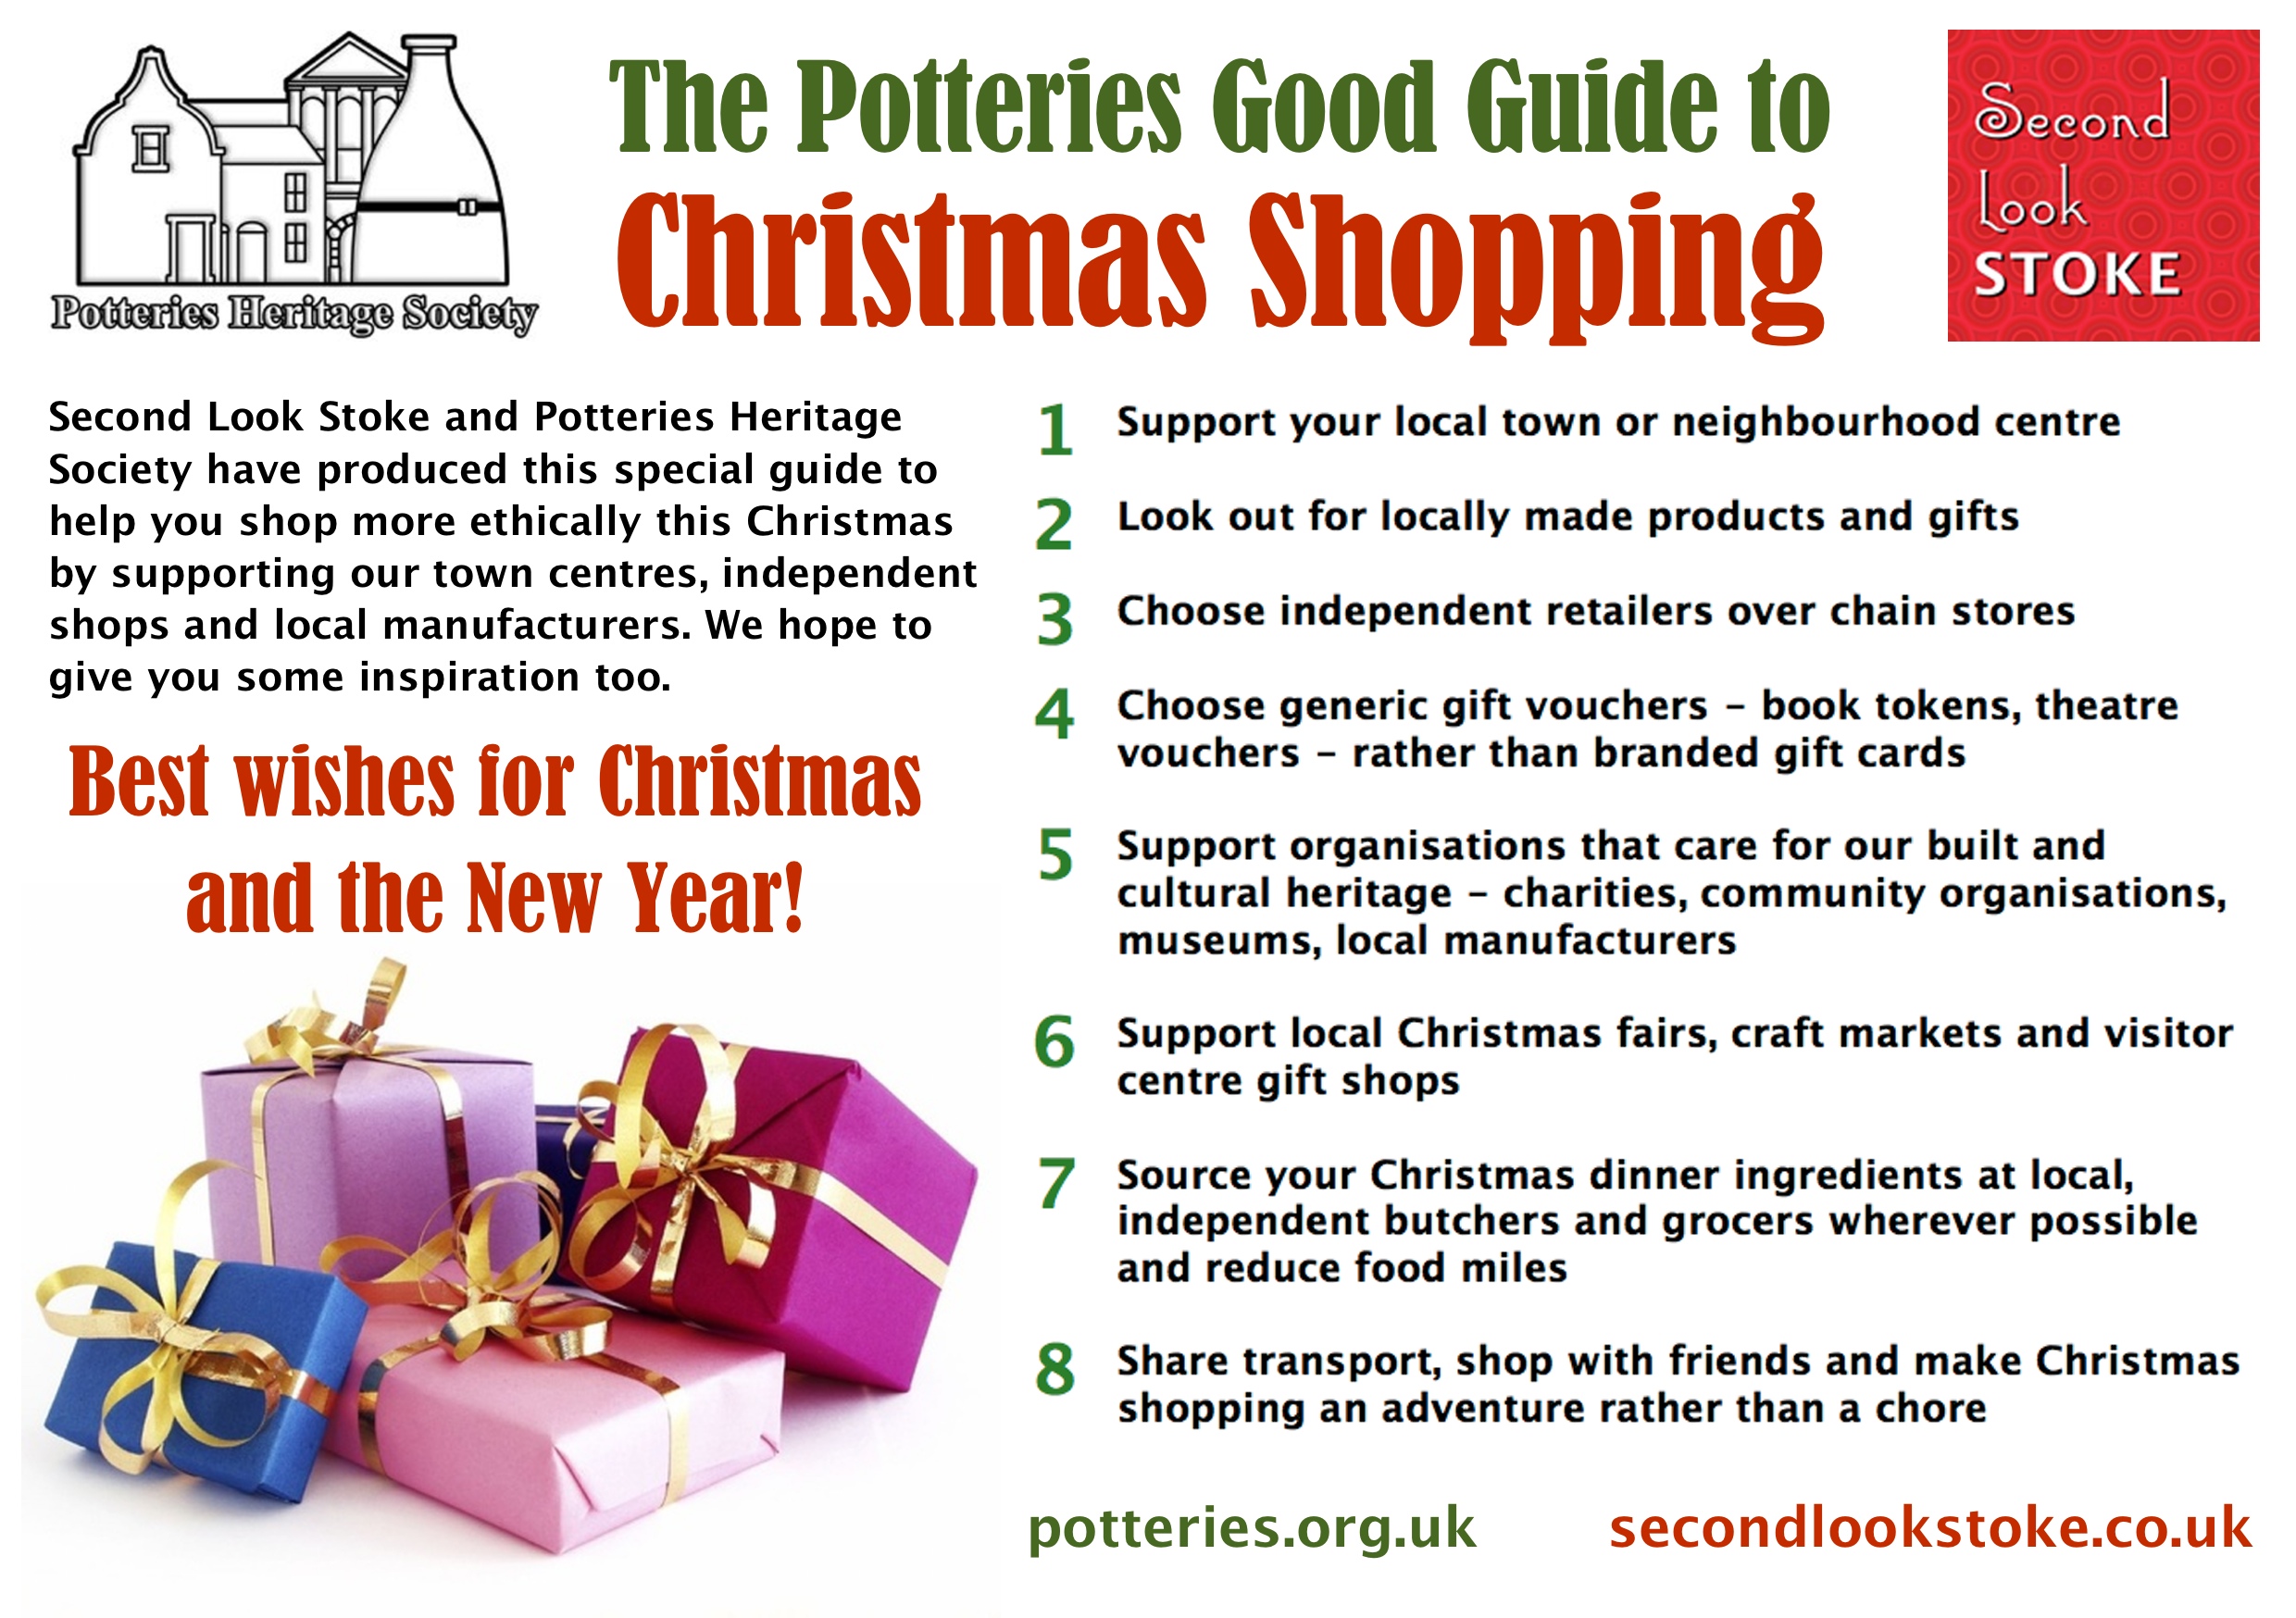 Potteries Good Guide to Christmas Shopping